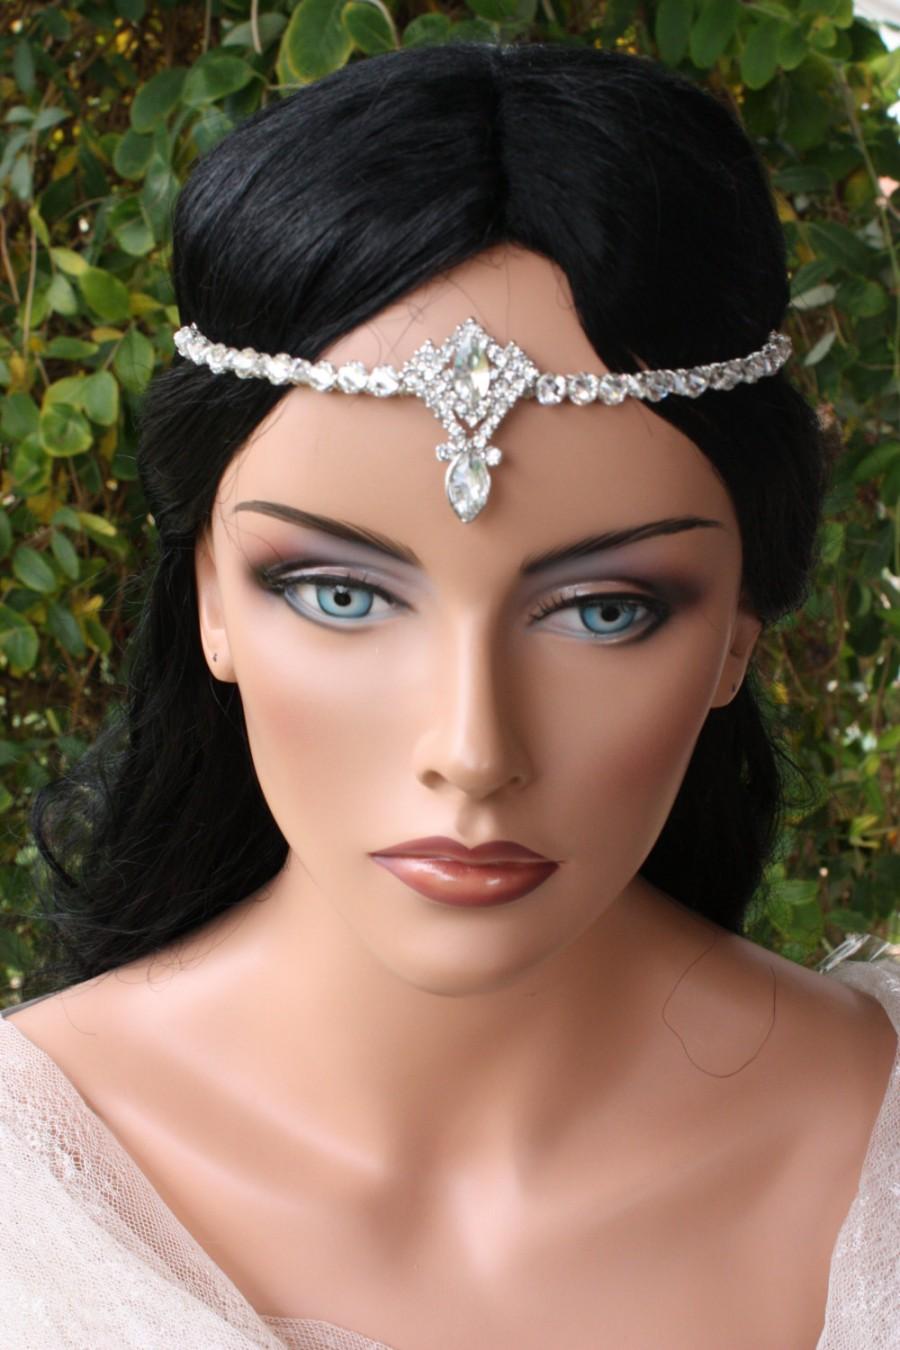 Wedding - Gorgeous Bridal Head Circlet  Head Piece with Rhinestones and Crystals, Large Centerpiece, Headband, Forehead, Ornate, Indian Style